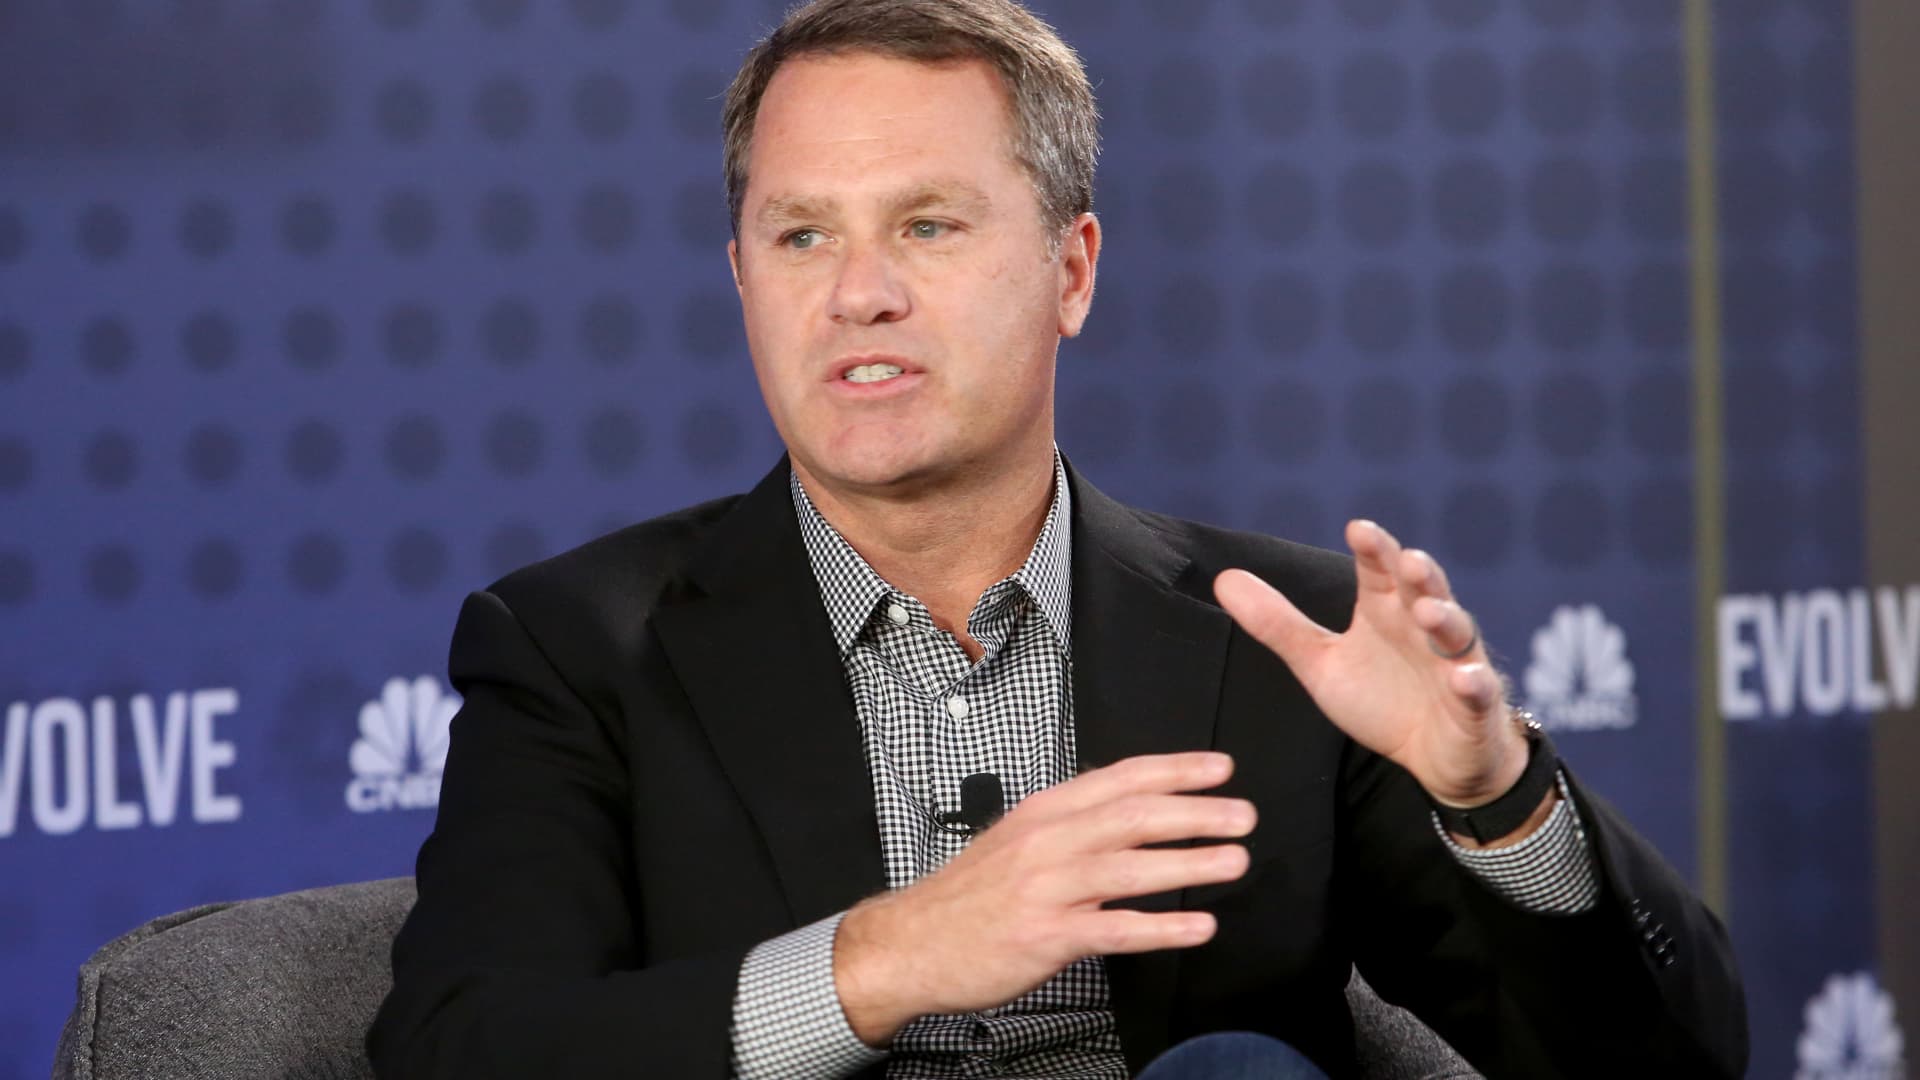 'What we see is a moment here': Walmart CEO Doug McMillon said nation's corporate leaders must advance racial equality